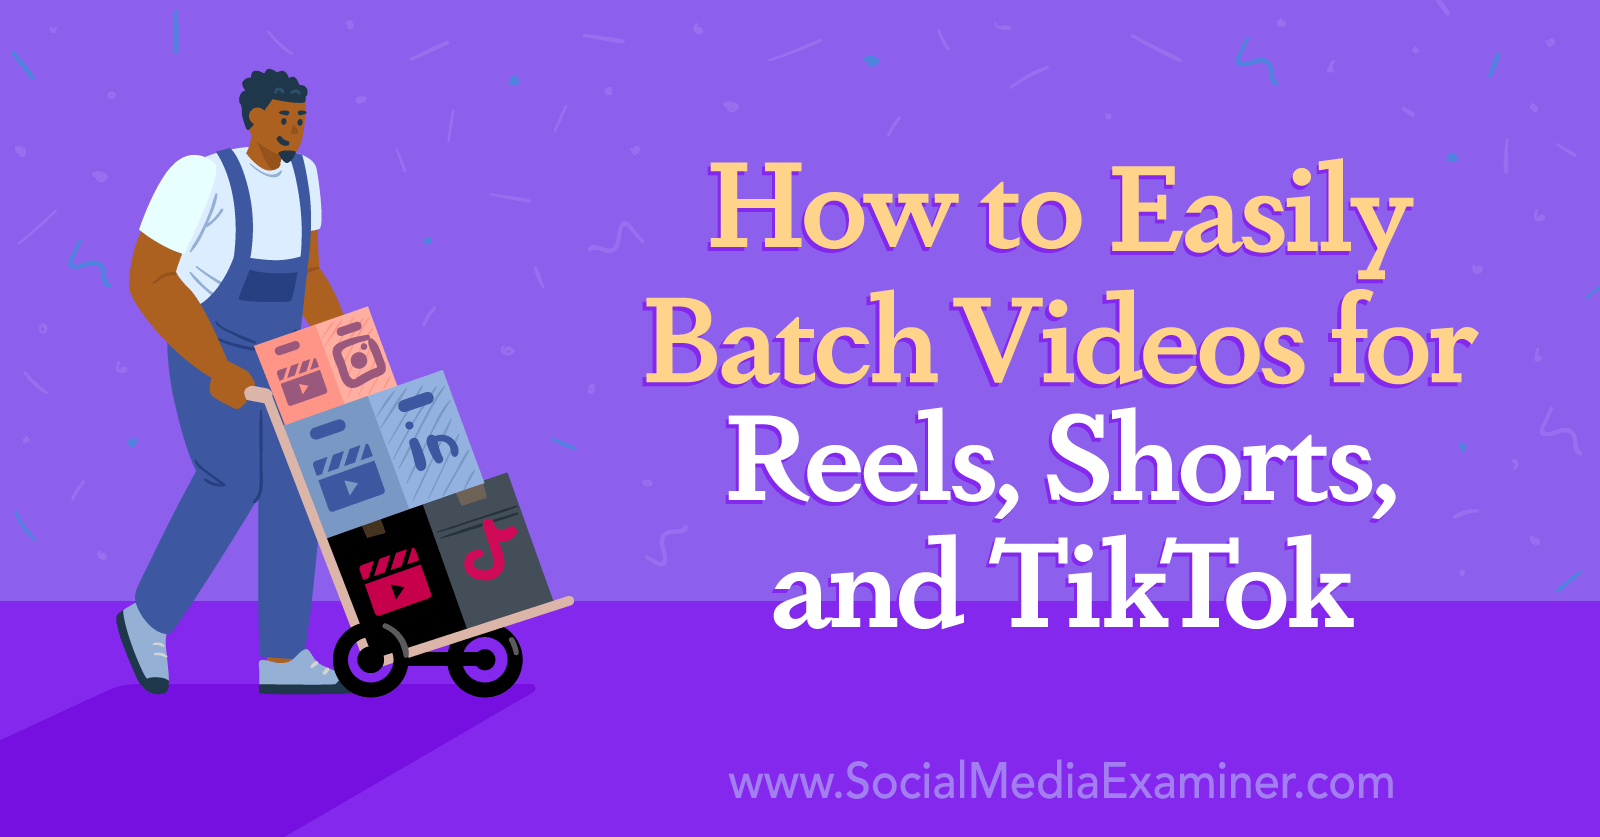 How to Easily Batch Videos for Reels, Shorts, and TikTok : Social